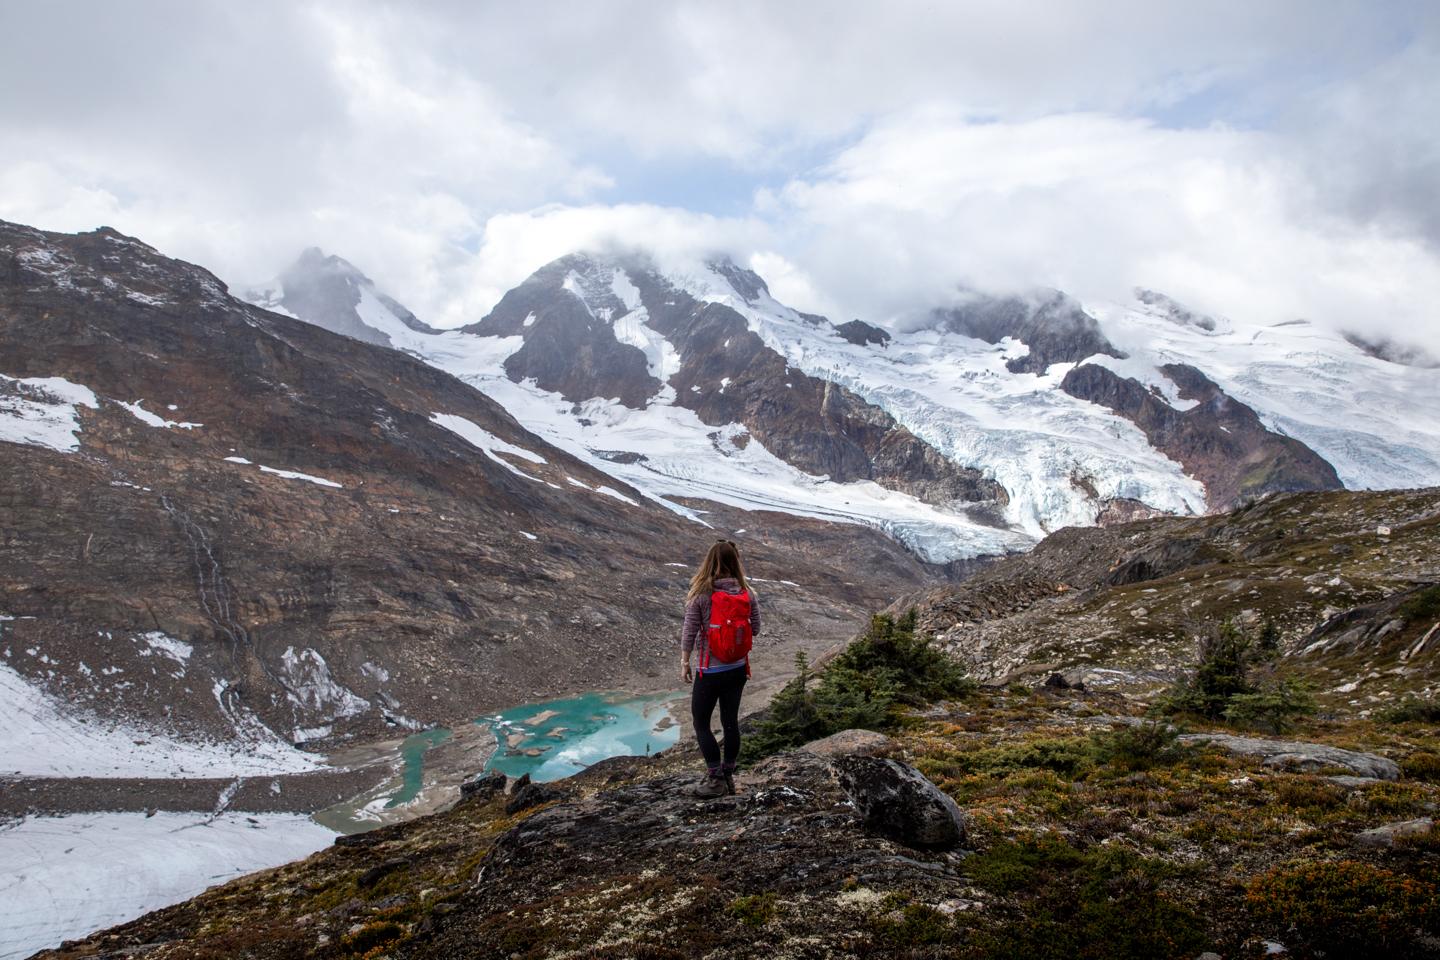 A woman with a red backpack on a ridge looking at a glacier